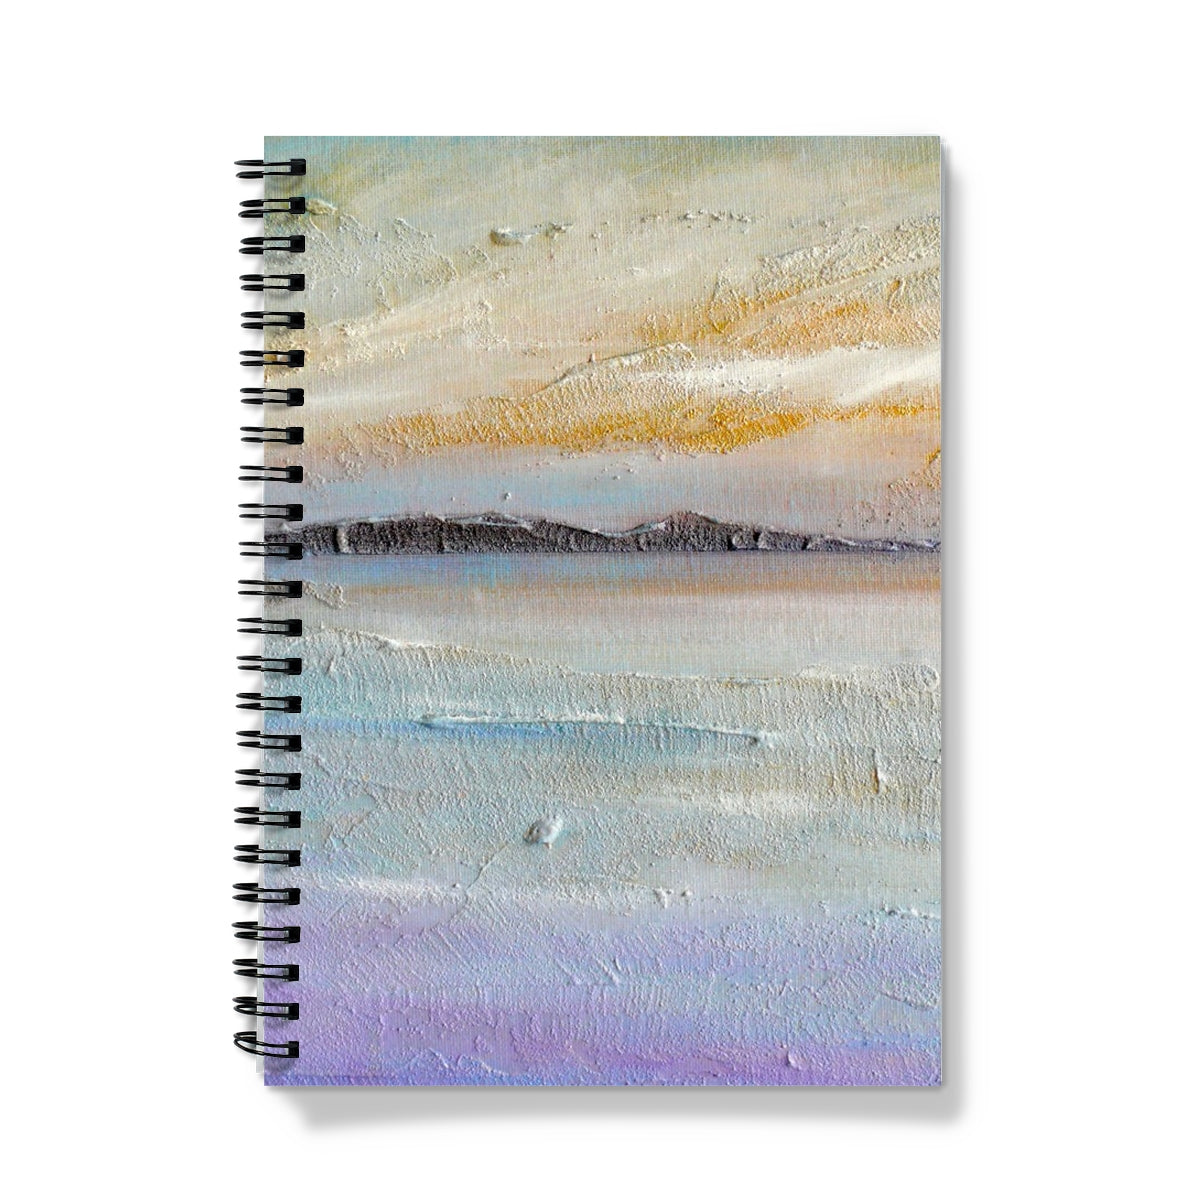 Sollas Beach South Uist Art Gifts Notebook-Journals & Notebooks-Hebridean Islands Art Gallery-A5-Lined-Paintings, Prints, Homeware, Art Gifts From Scotland By Scottish Artist Kevin Hunter